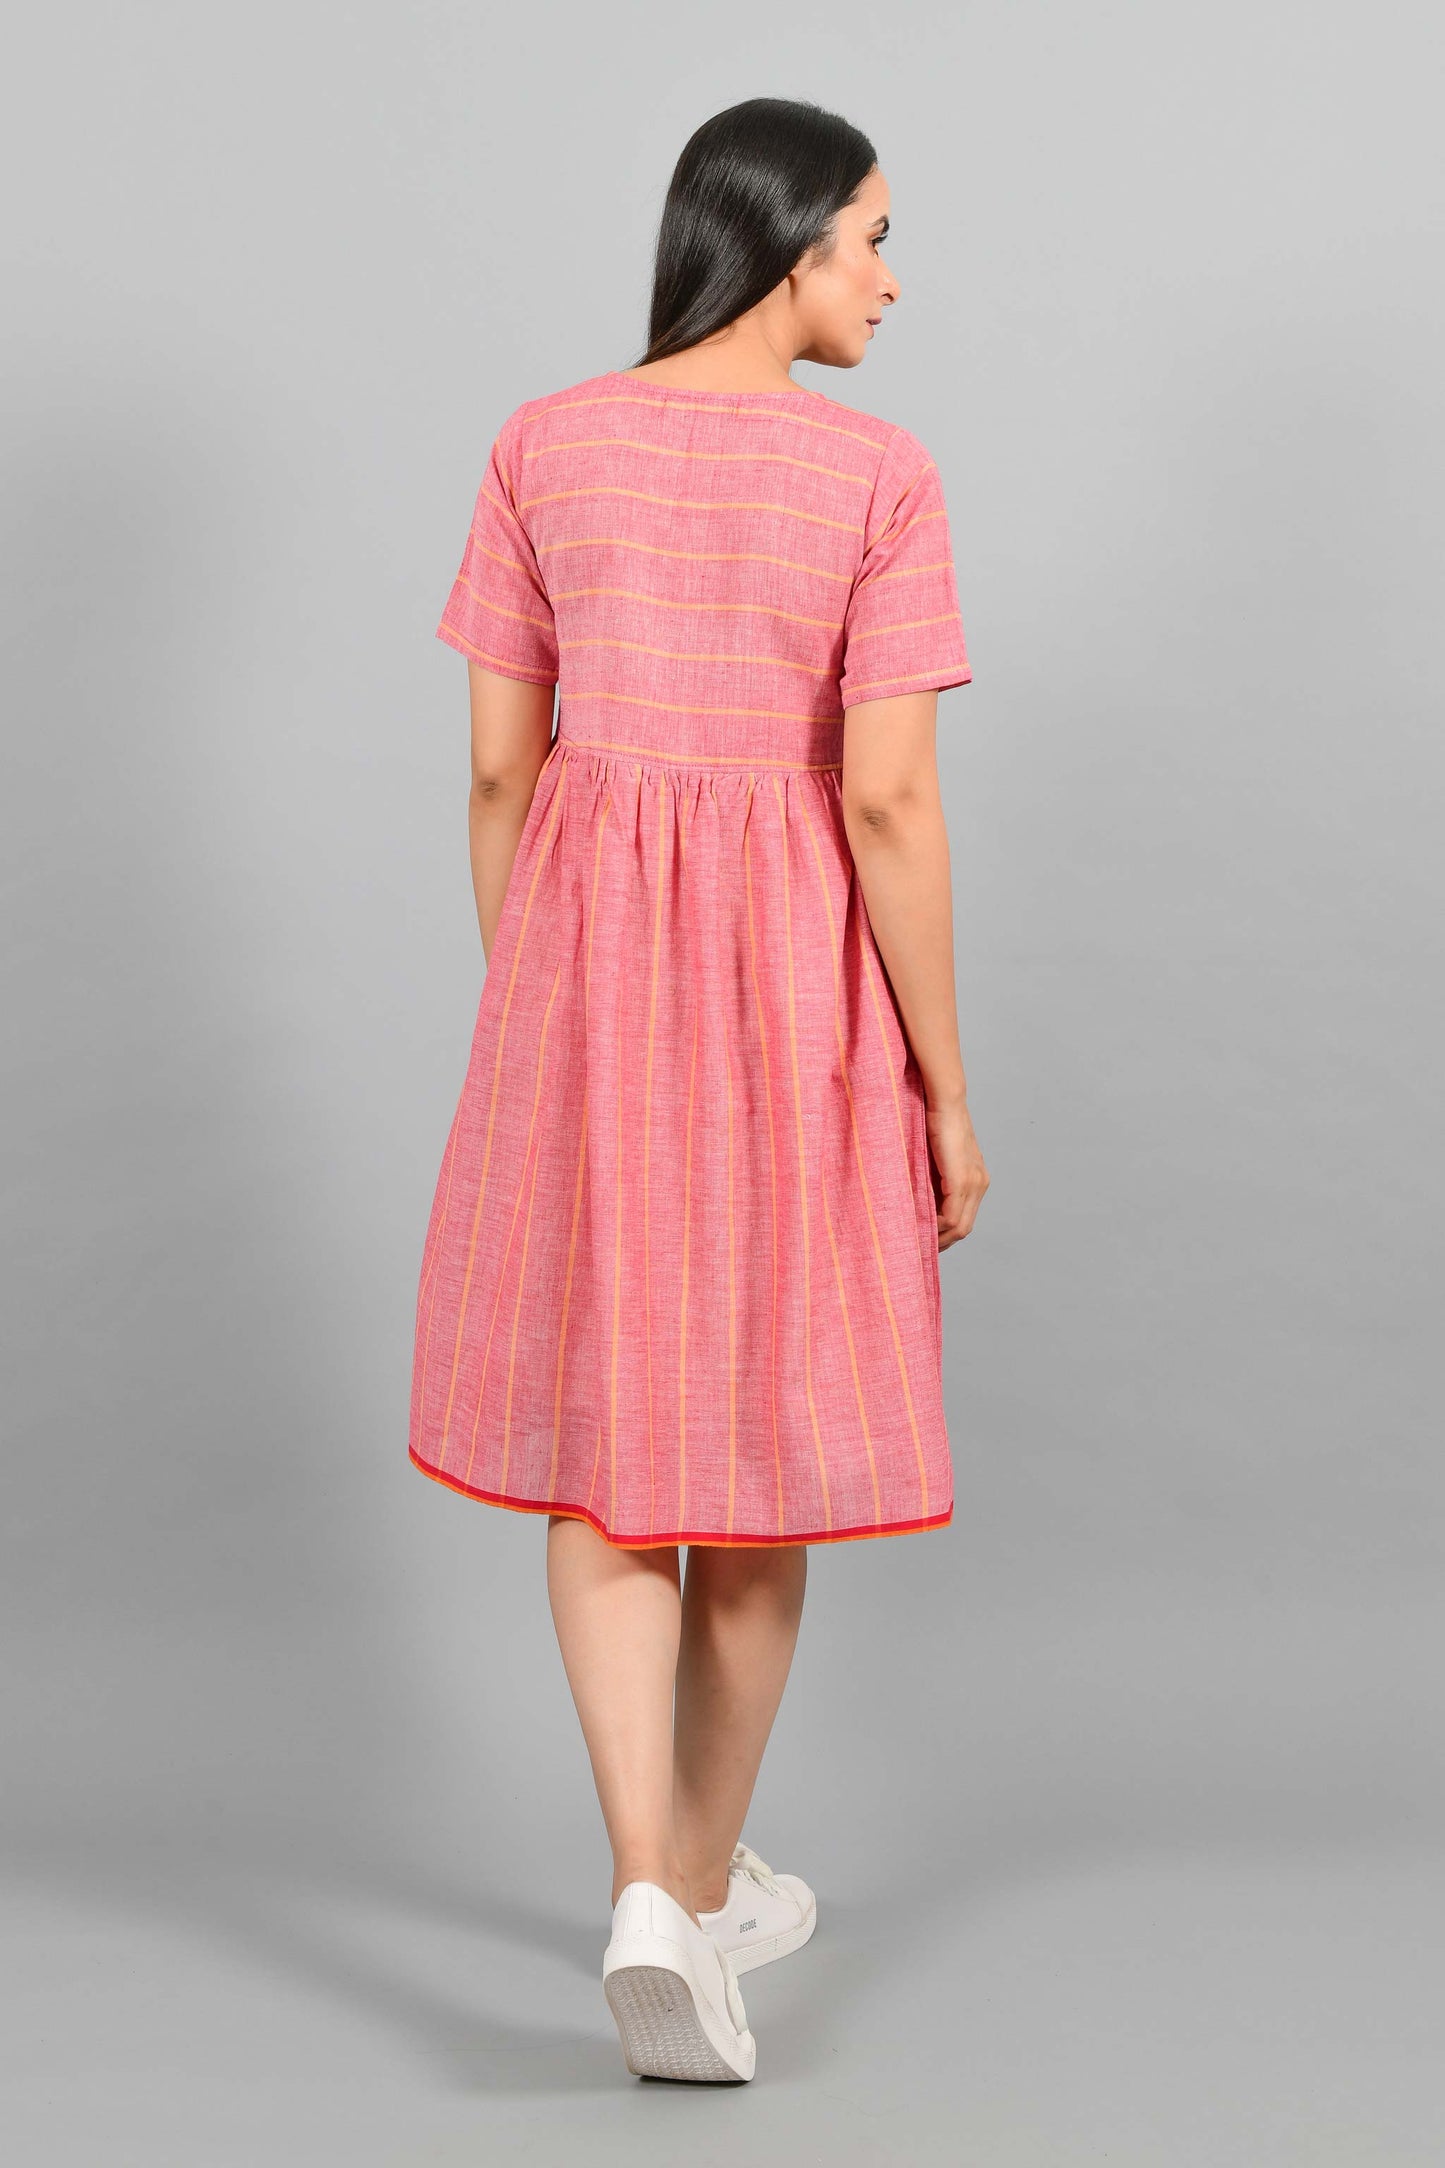 Back pose of an Indian female womenswear fashion model in a red chambray handspun and handwoven khadi cotton with orange stripes by Cotton Rack. The dress has front buttoned yoke and gathers at waist.